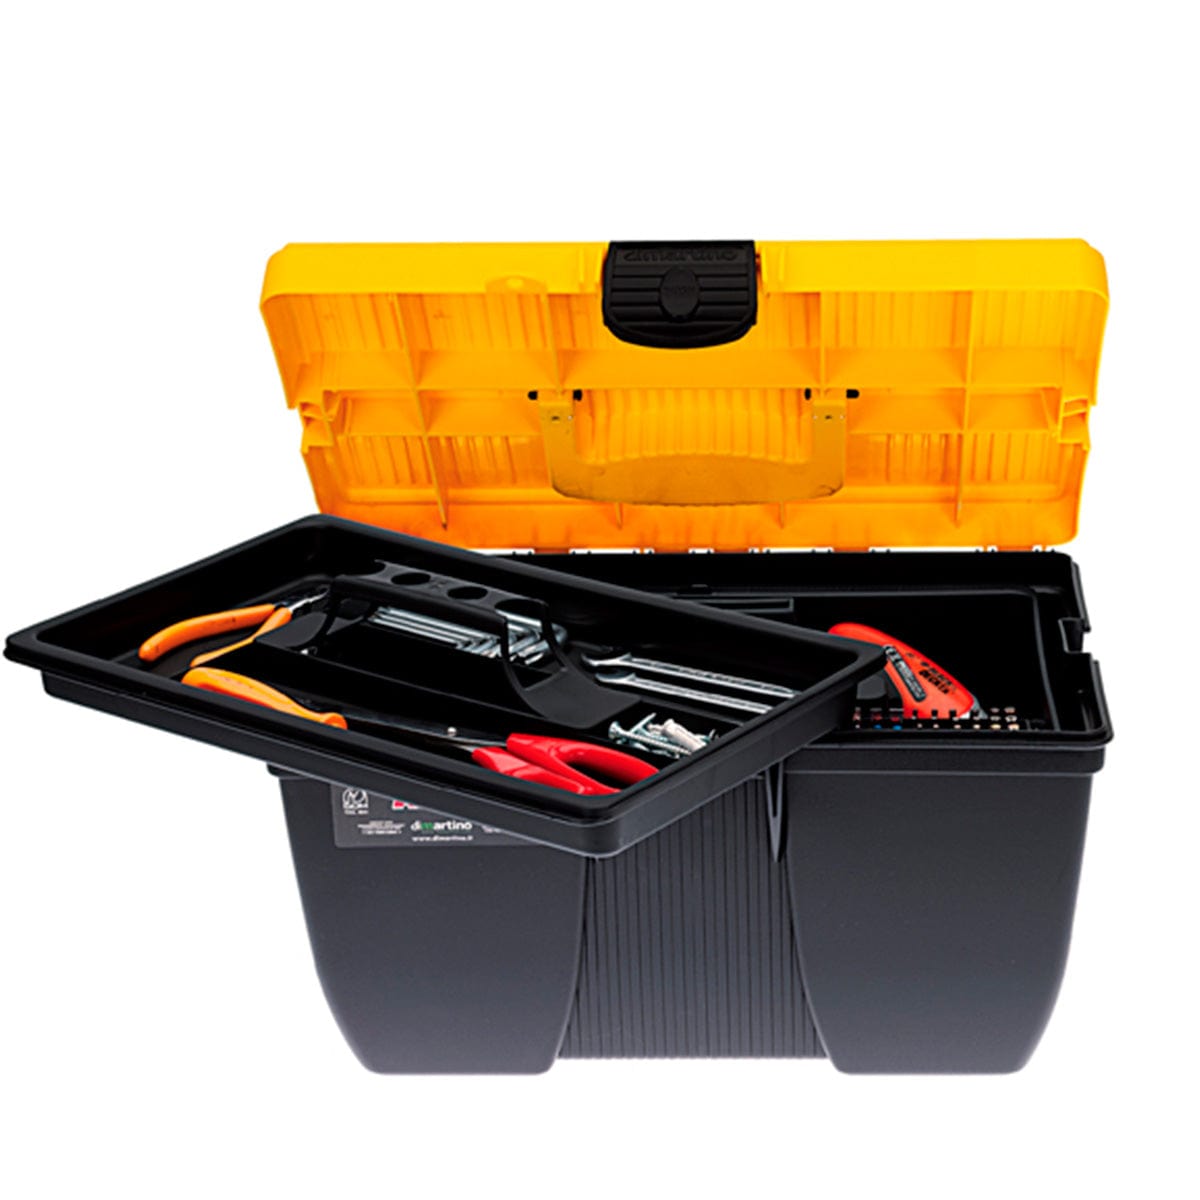 Buy Dimartino Toolbox 38x26x22cm Arka 400 - 401N | Supply Master Accra, Ghana Tool Boxes Bags & Belts Buy Tools hardware Building materials